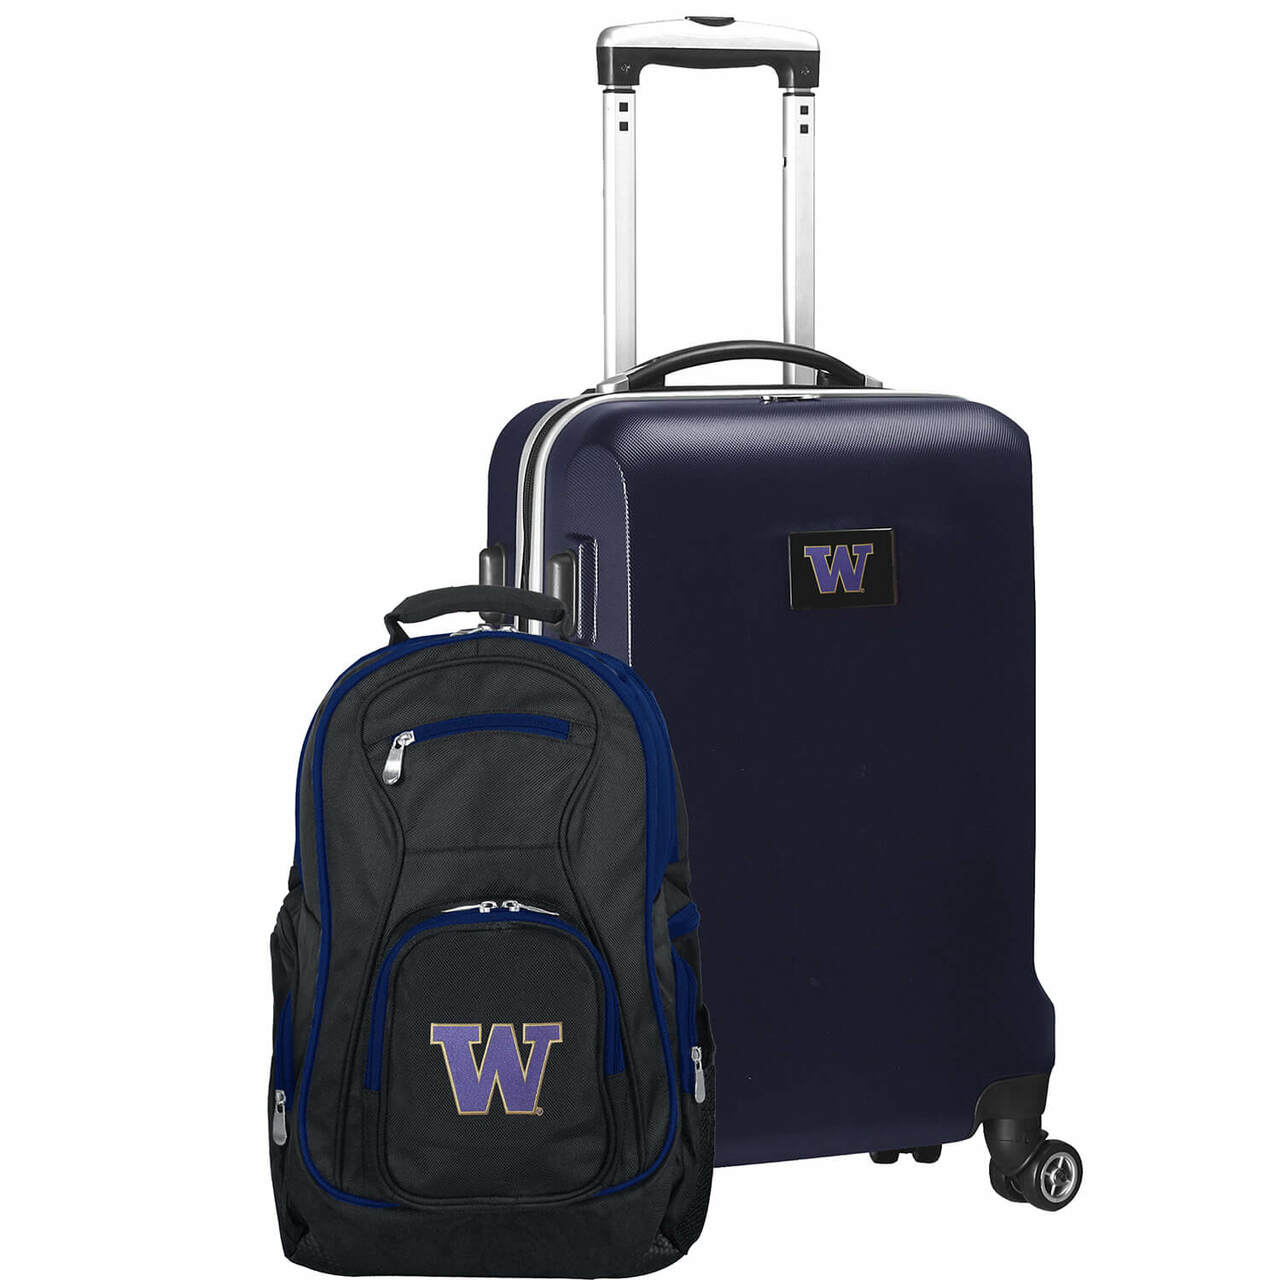 Washington Huskies Deluxe 2-Piece Backpack and Carry-on Set in Navy